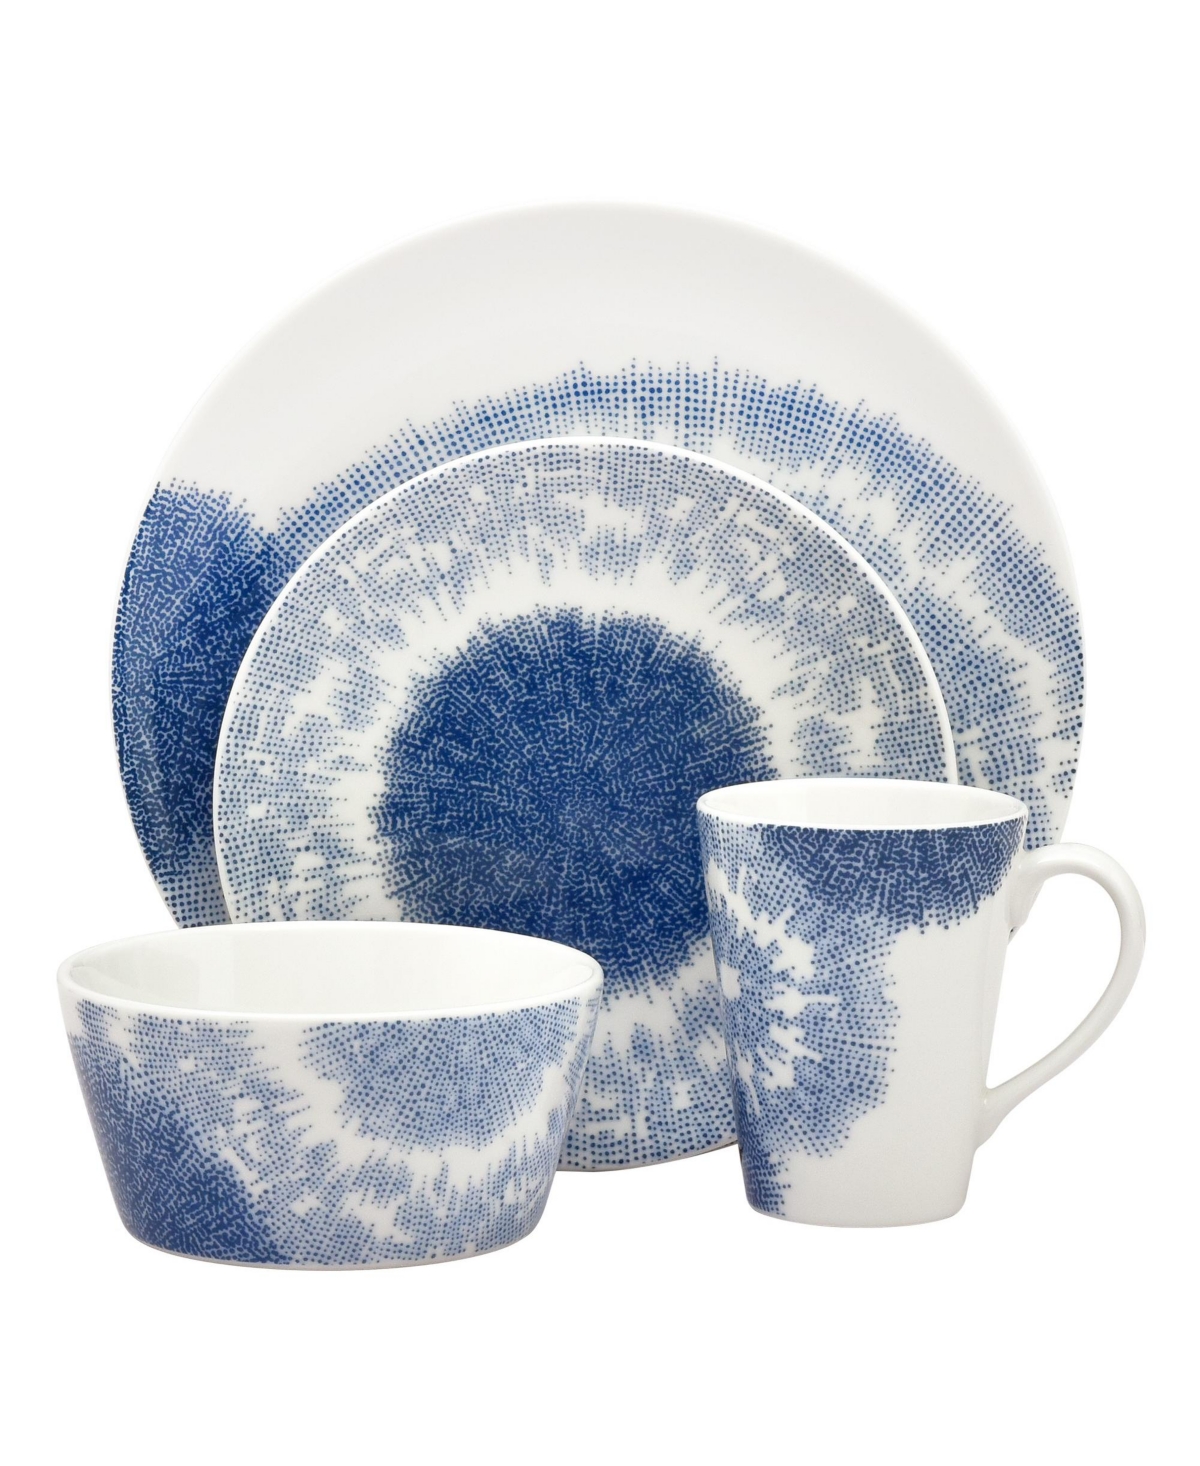 Aozora 4 Piece Coupe Place Setting - White And Blue